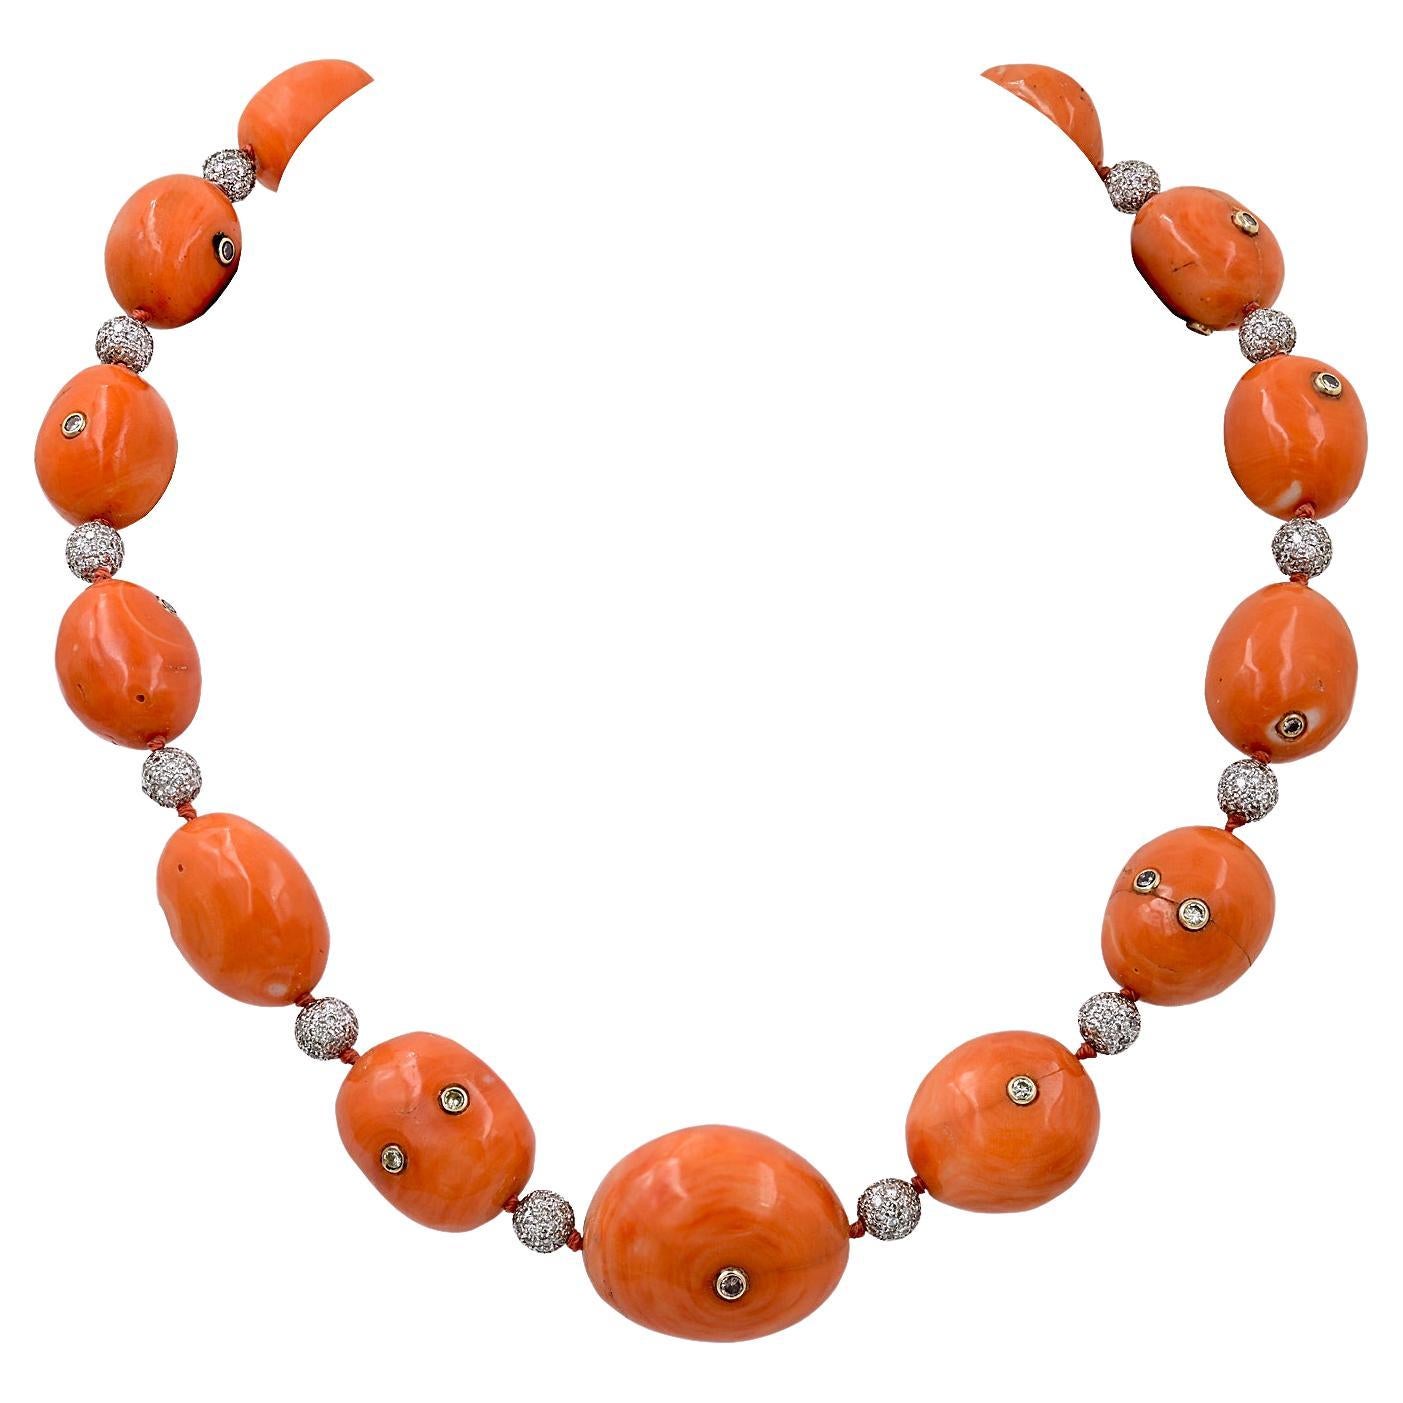 Japanese Coral Beads and Diamond Balls Necklace